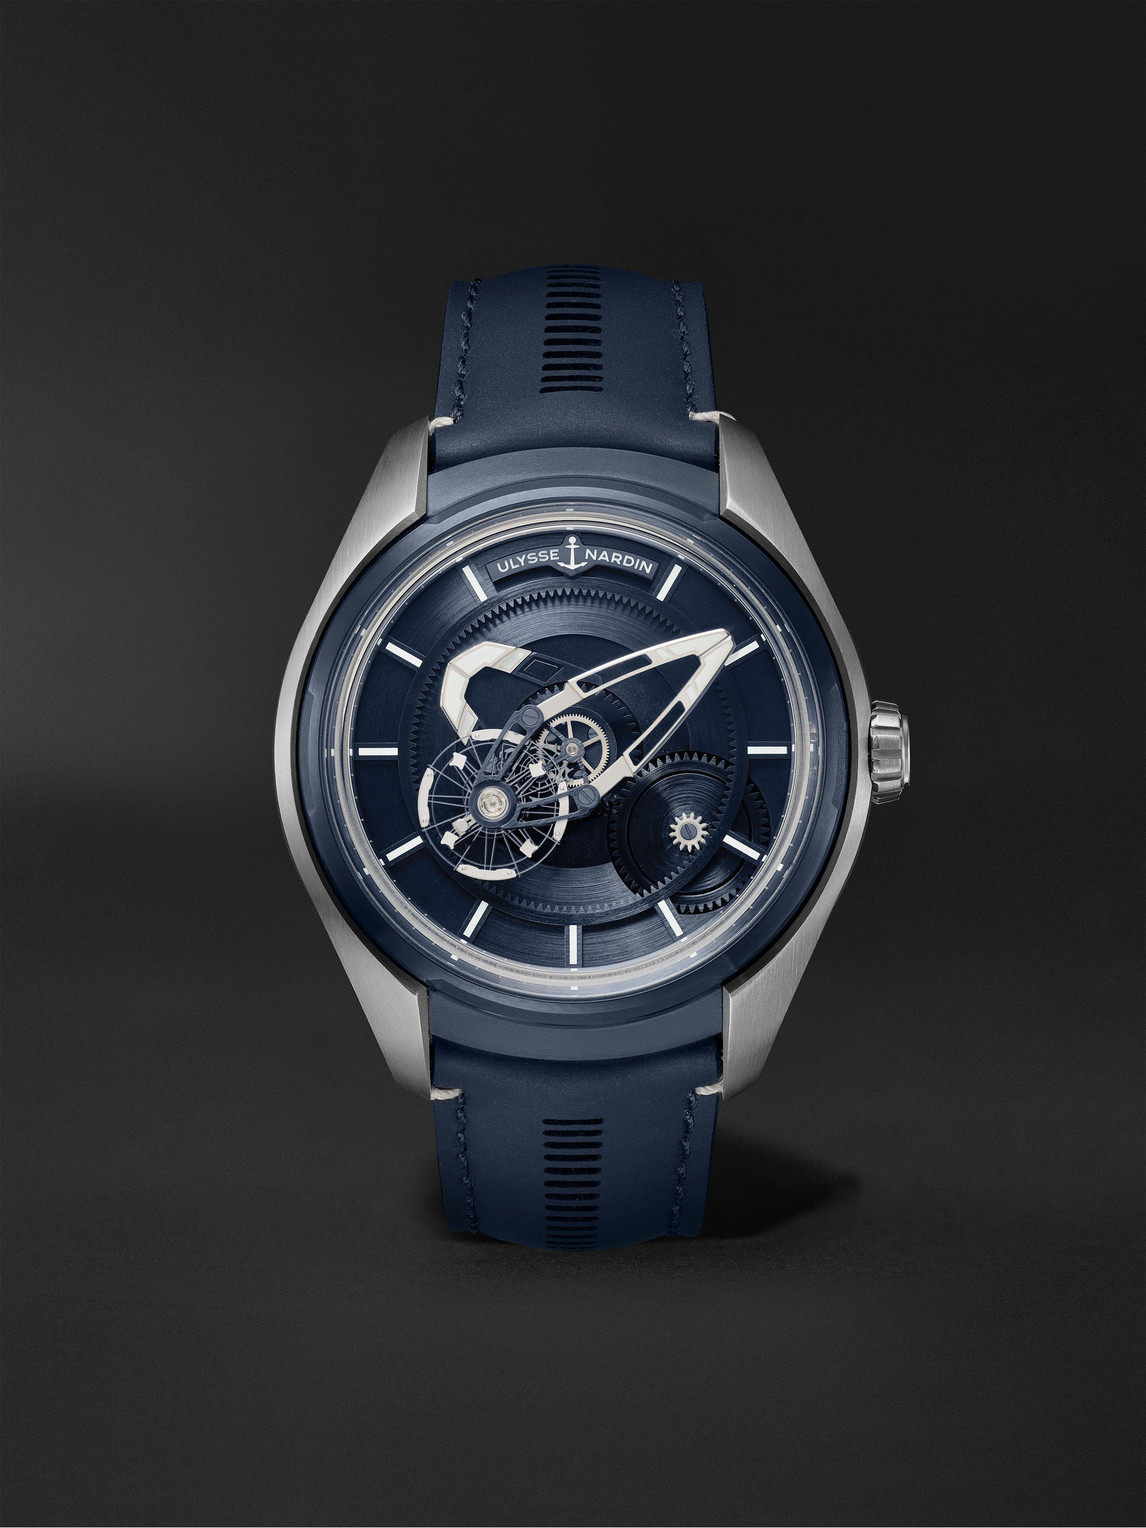 Ulysse Nardin Freak X Automatic 43mm Titanium And Leather Watch, Ref. No. 2303-270.1/03 In Blue